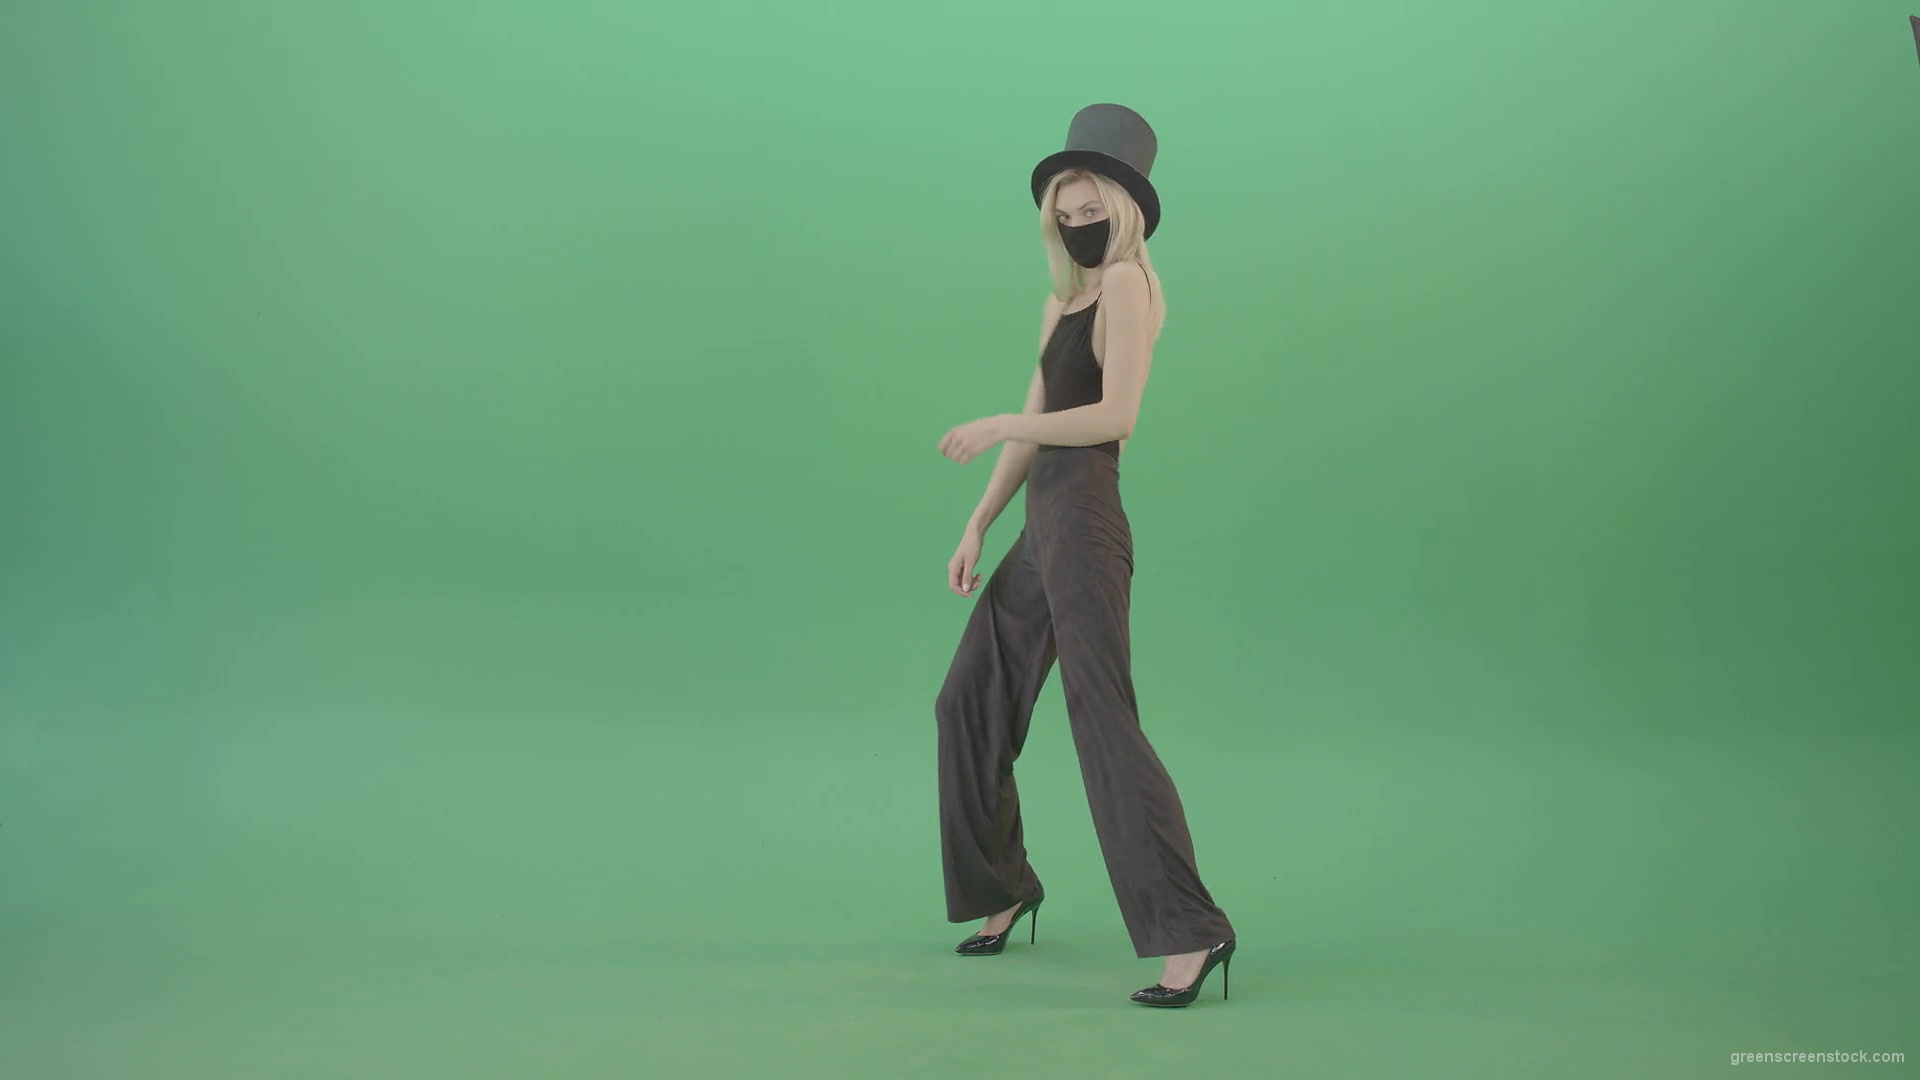 Covid-Mask-Girl-in-Black-cylinder-Hat-dancing-in-front-and-back-side-view-isolated-on-green-screen-Video-Footage-1920_004 Green Screen Stock